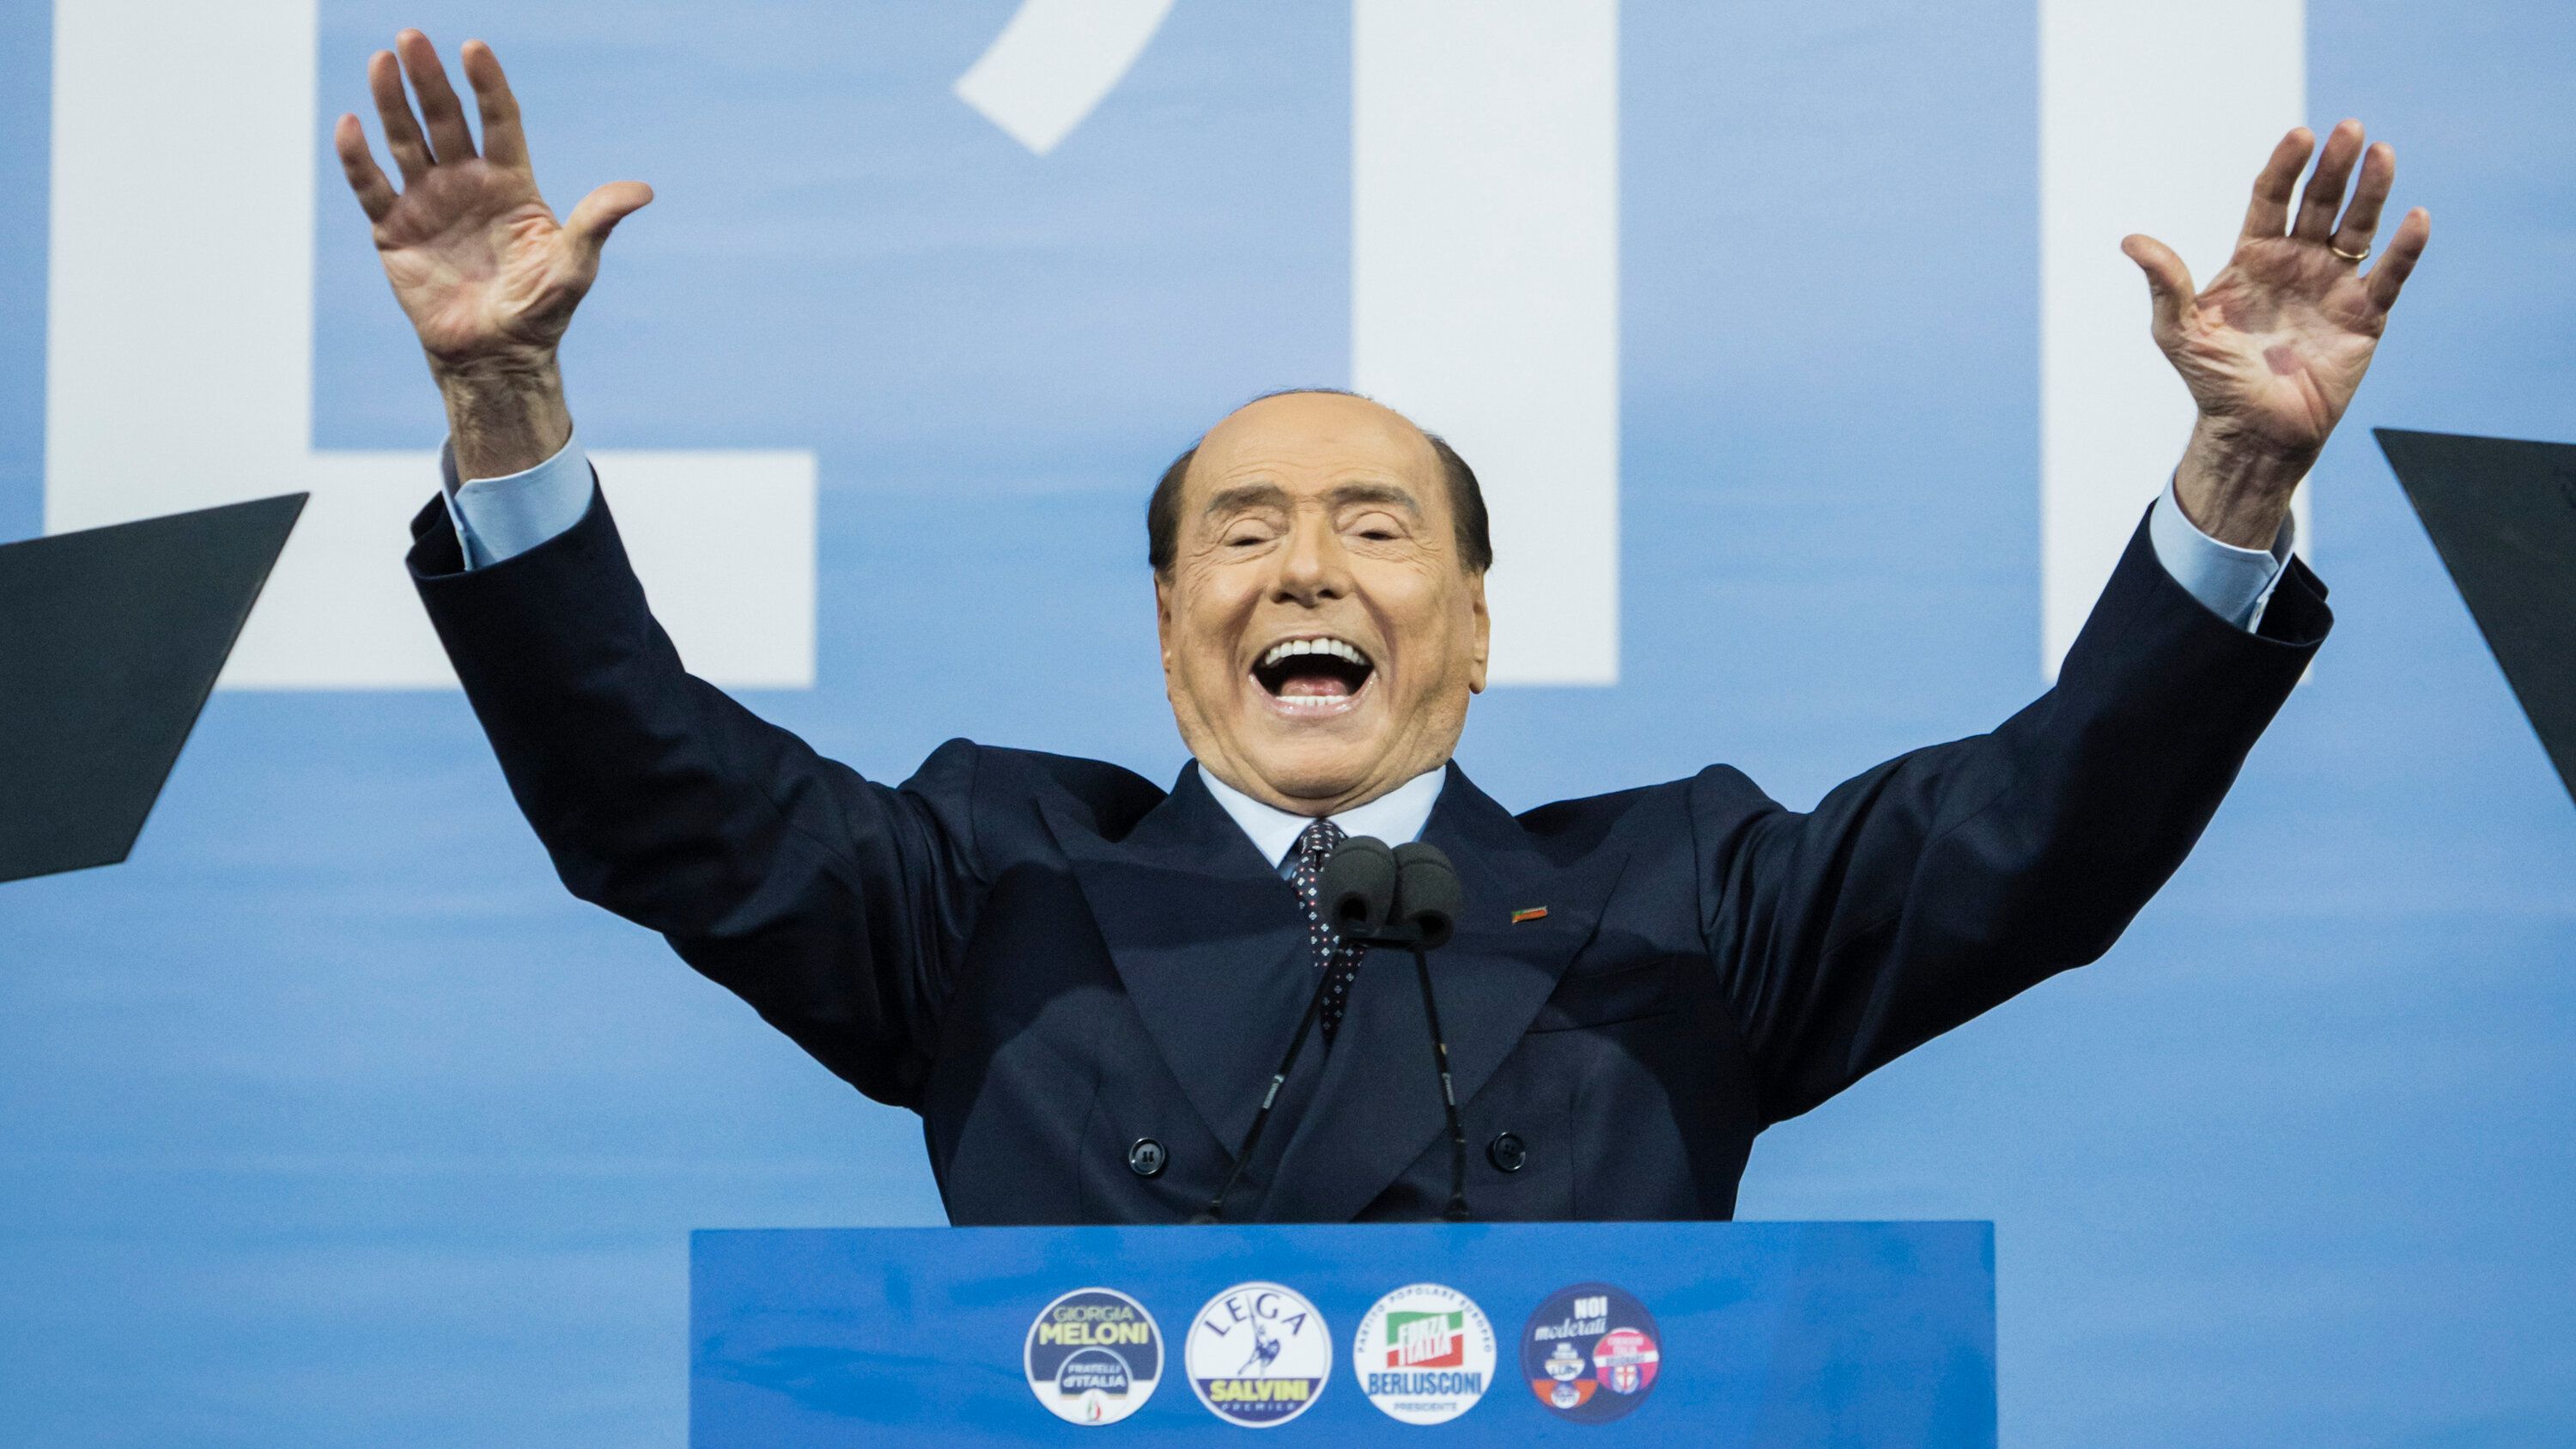 Berlusconi asked to keep his promise and order a bus with prostitutes for Monza players